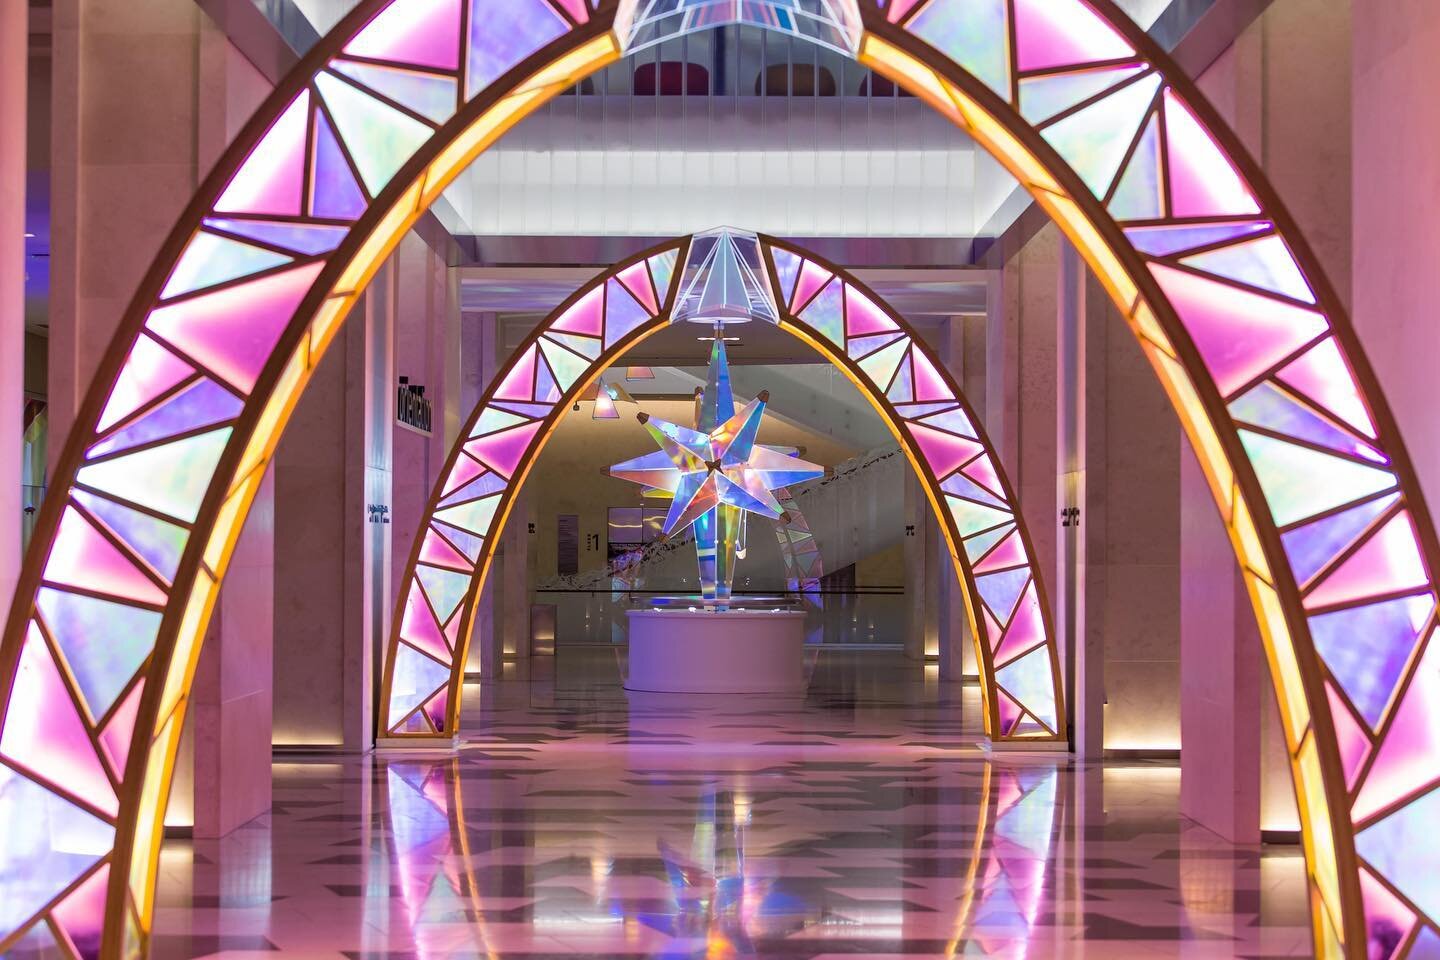 Throwback to the holiday season and this beautiful Christmas Experience installation we created for the Museum of the Bible in Washington, D.C. Handcrafted wood arches and a modern, rotating Star of Bethlehem played with color and light, creating a d